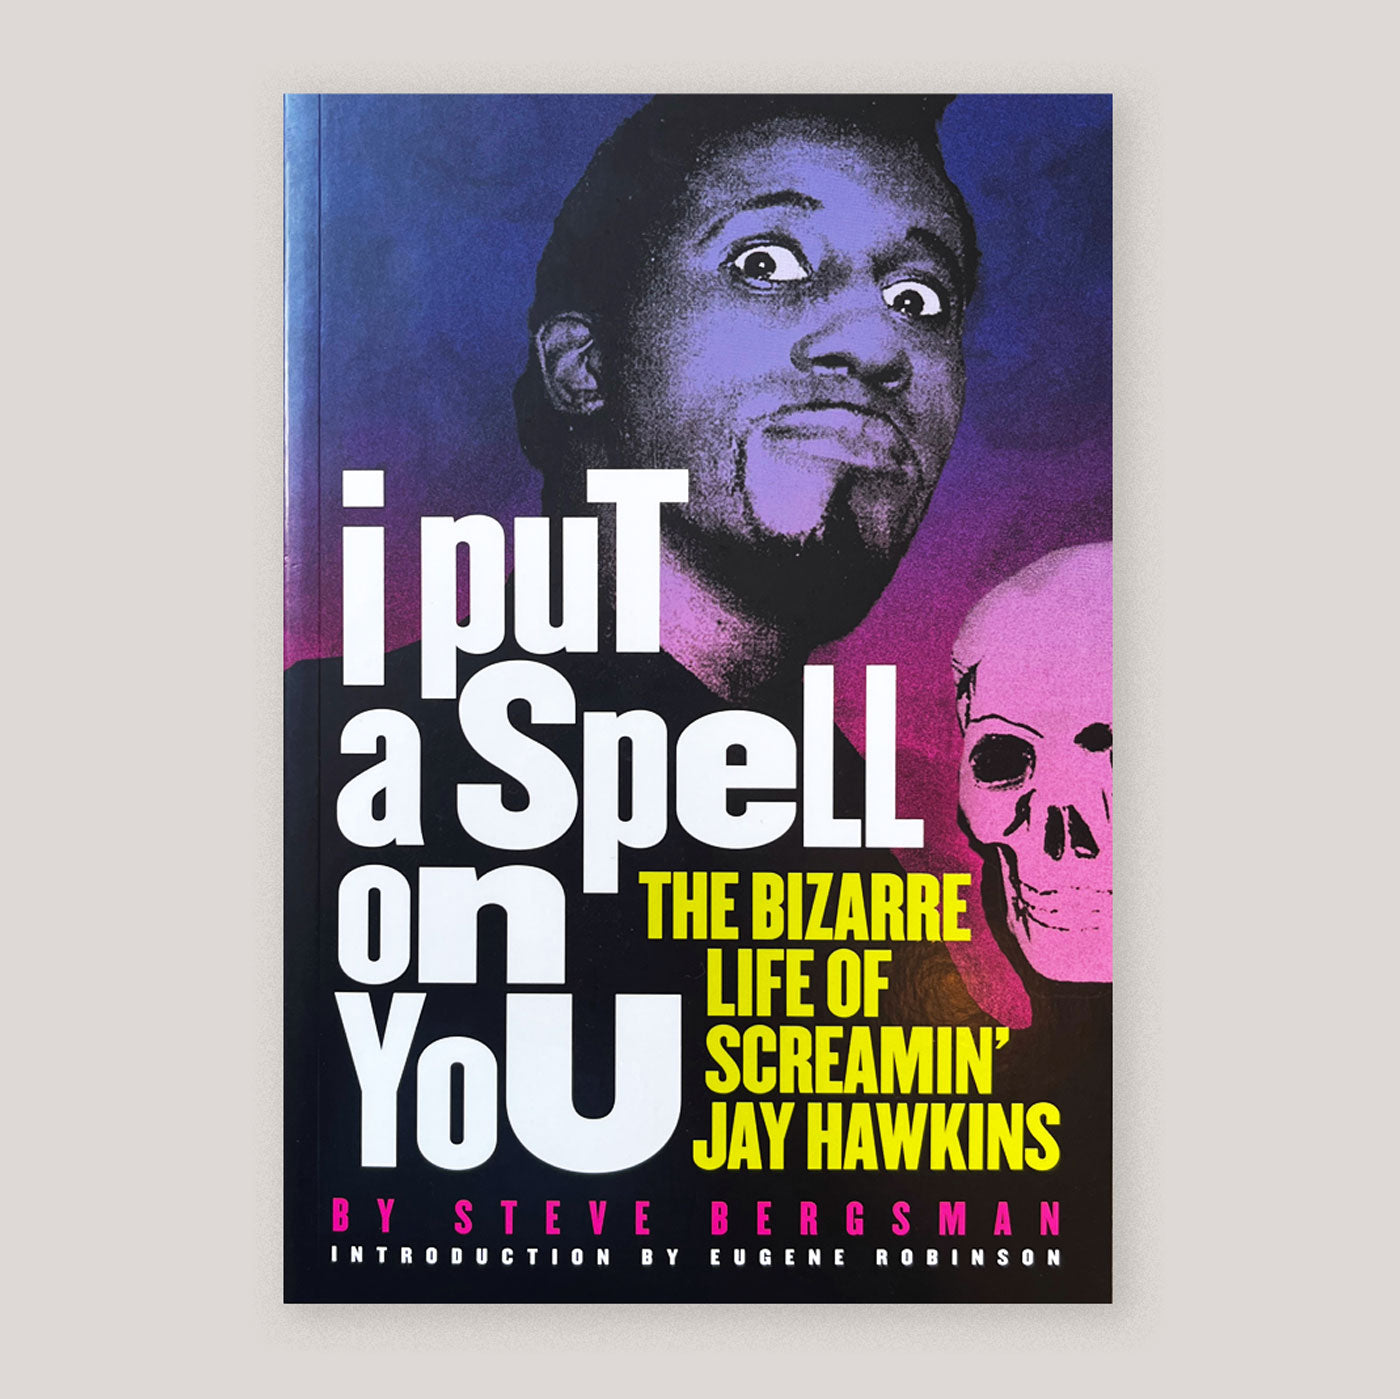 I Put A Spell On You: The Bizarre Life of Screamin' Jay Hawkins | Steve Bergsman | Colours May Vary 